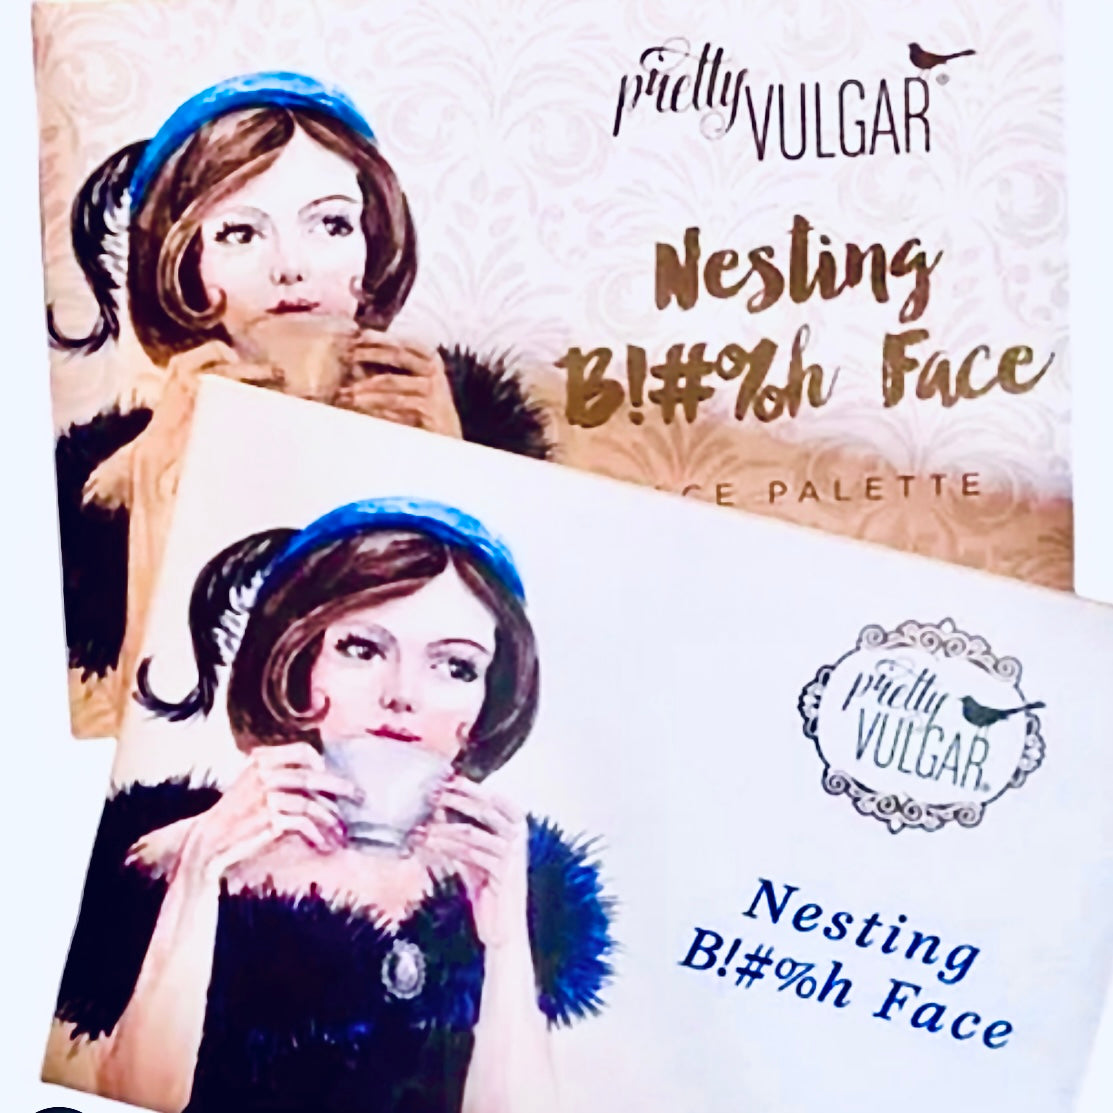 Pretty Vulgar Nesting B*tch Face Palette is a limited edition palette that is no longer in production or being manufactured. This limited edition high pigment Face palette offers 6 rare blush and bronzer shades that fits all skin types and tones. It’s made up of all natural cutlery free vegan ingredients you can feel good about using and this palette is great for all skin type including the most sensitive problematic skin. This palette is only available at Facetreasures.com or LadiesNGentz.com